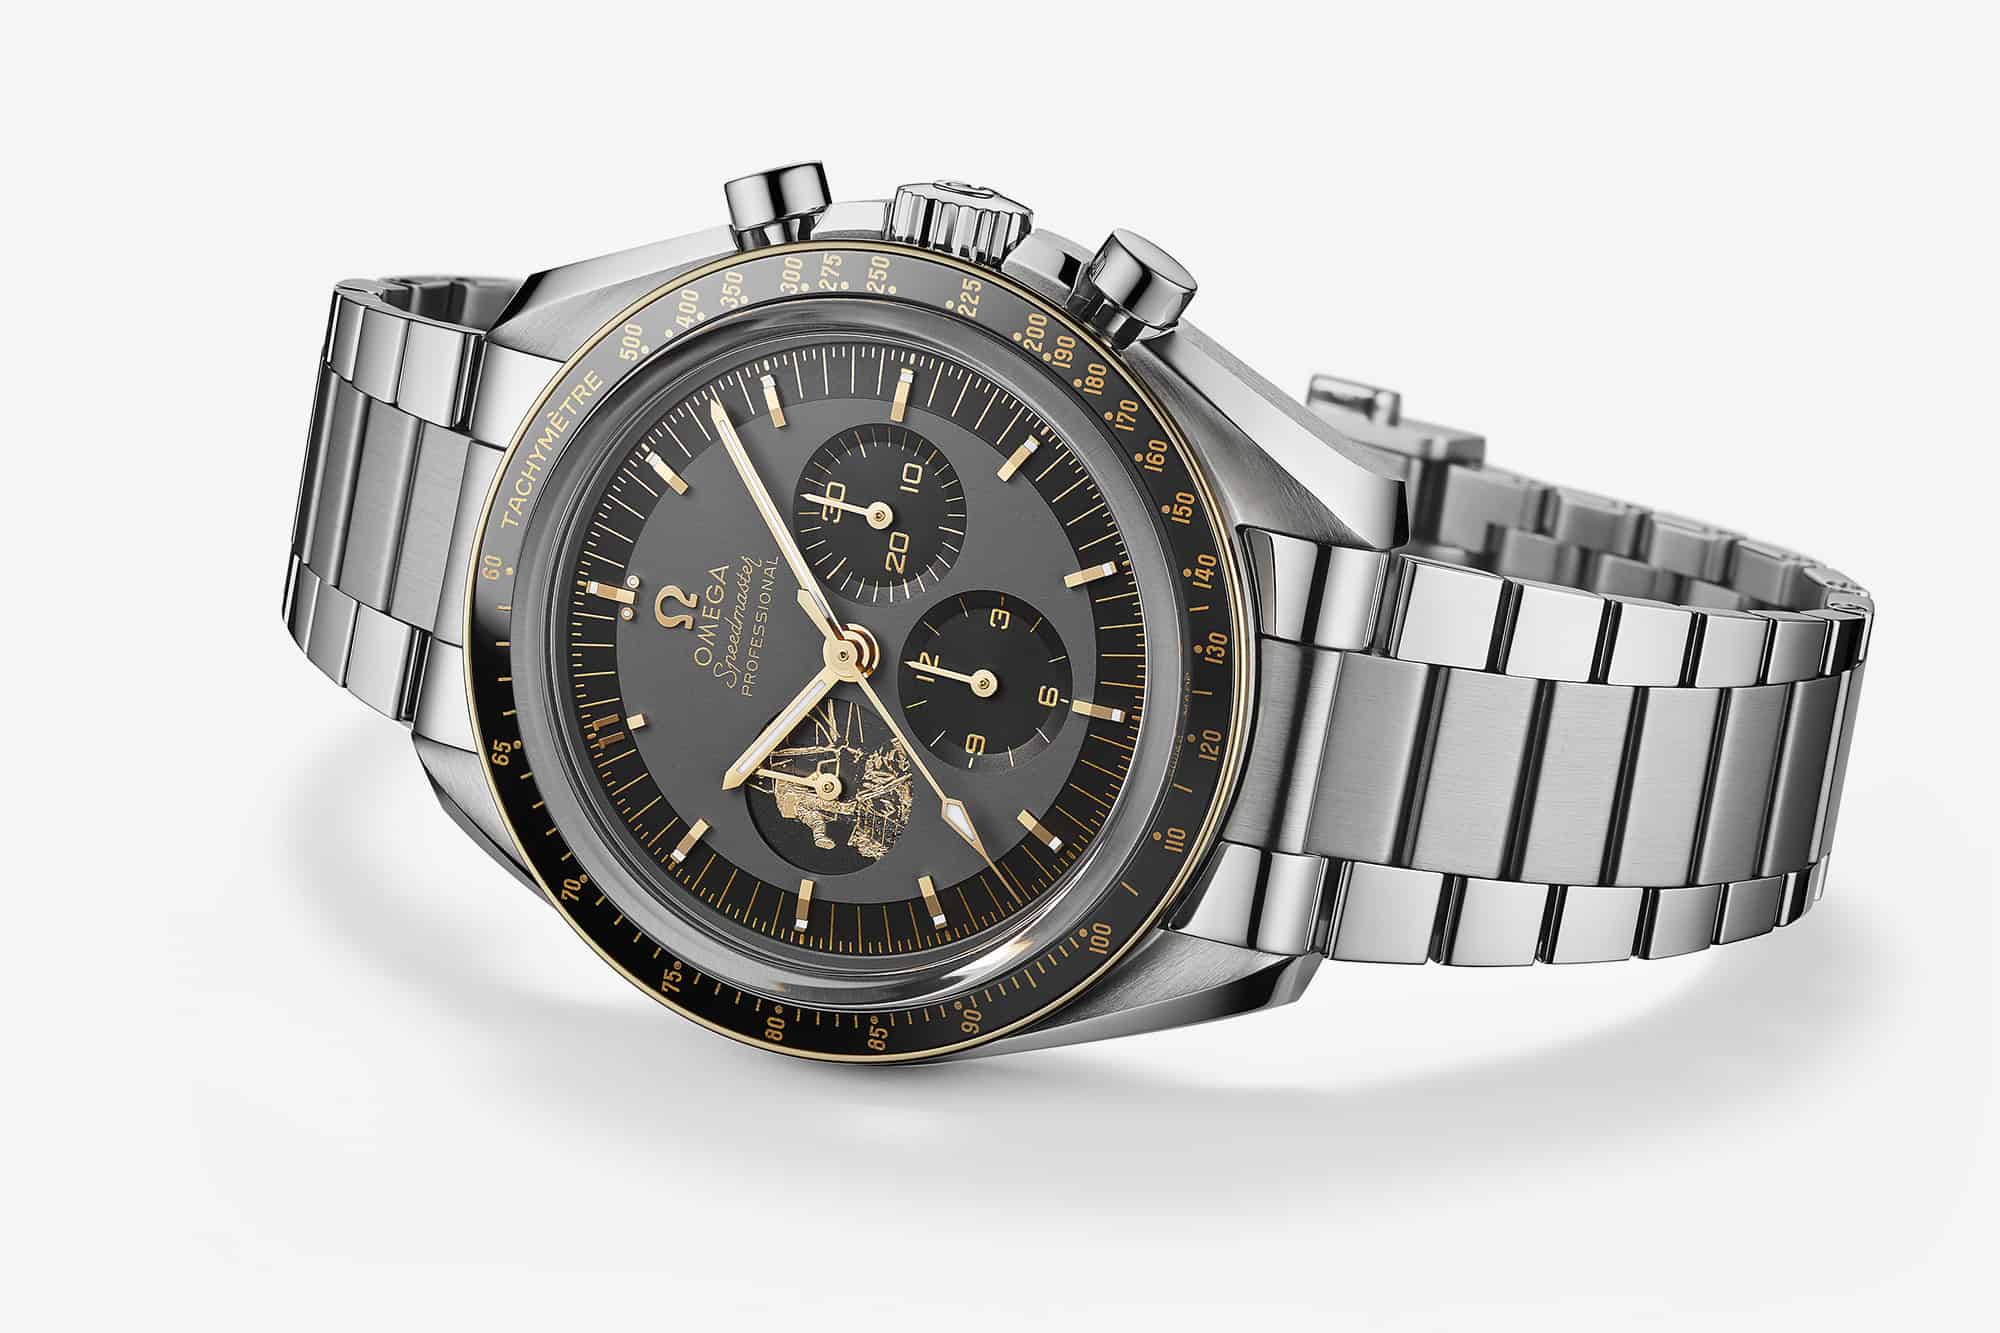 Introducing the Omega Speedmaster Apollo 11 50th Anniversary LE, Fitting Tribute or Too On The Nose"